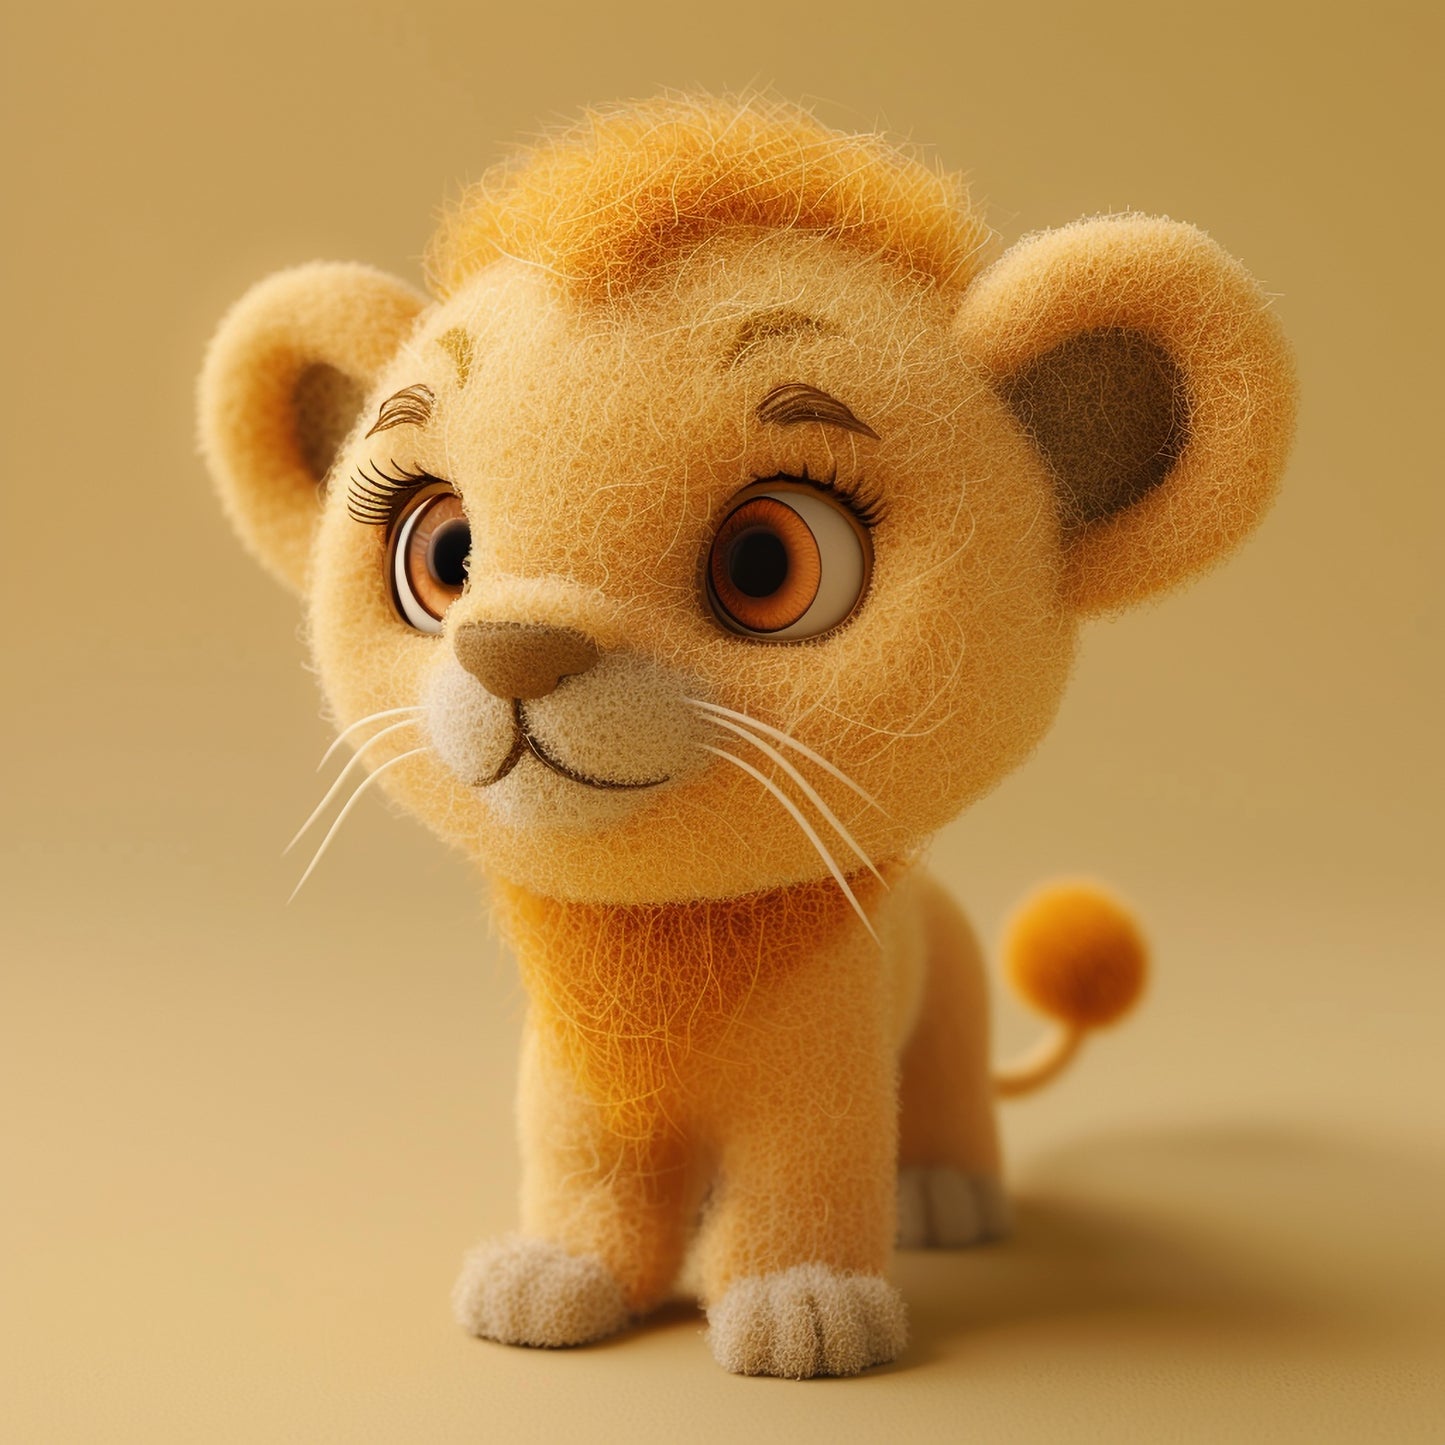 Adorable Needle Felted Lion Cub with Cute Expression